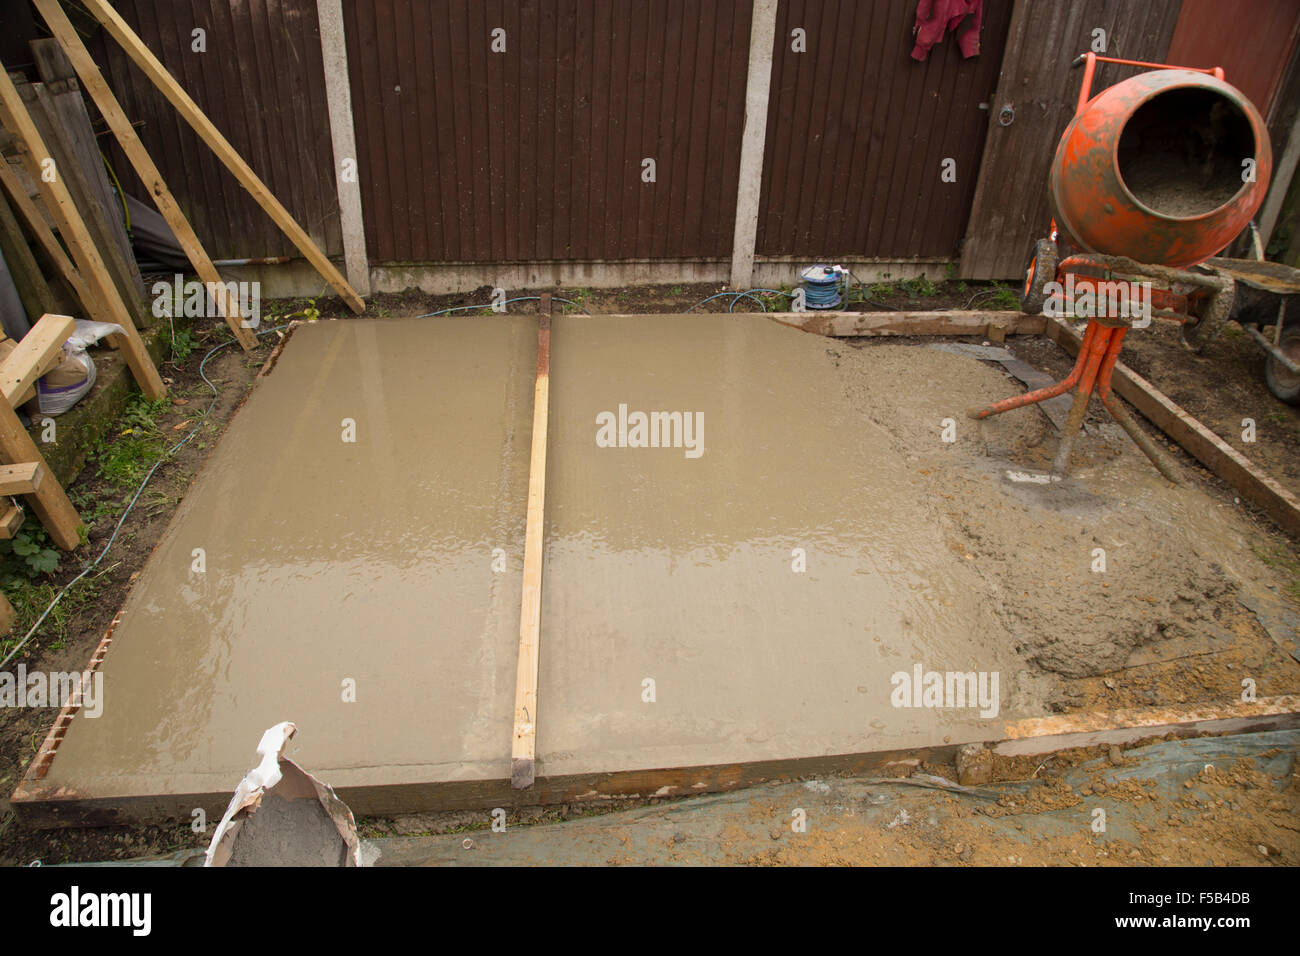 Smoothing of cement of a shed base Stock Photo